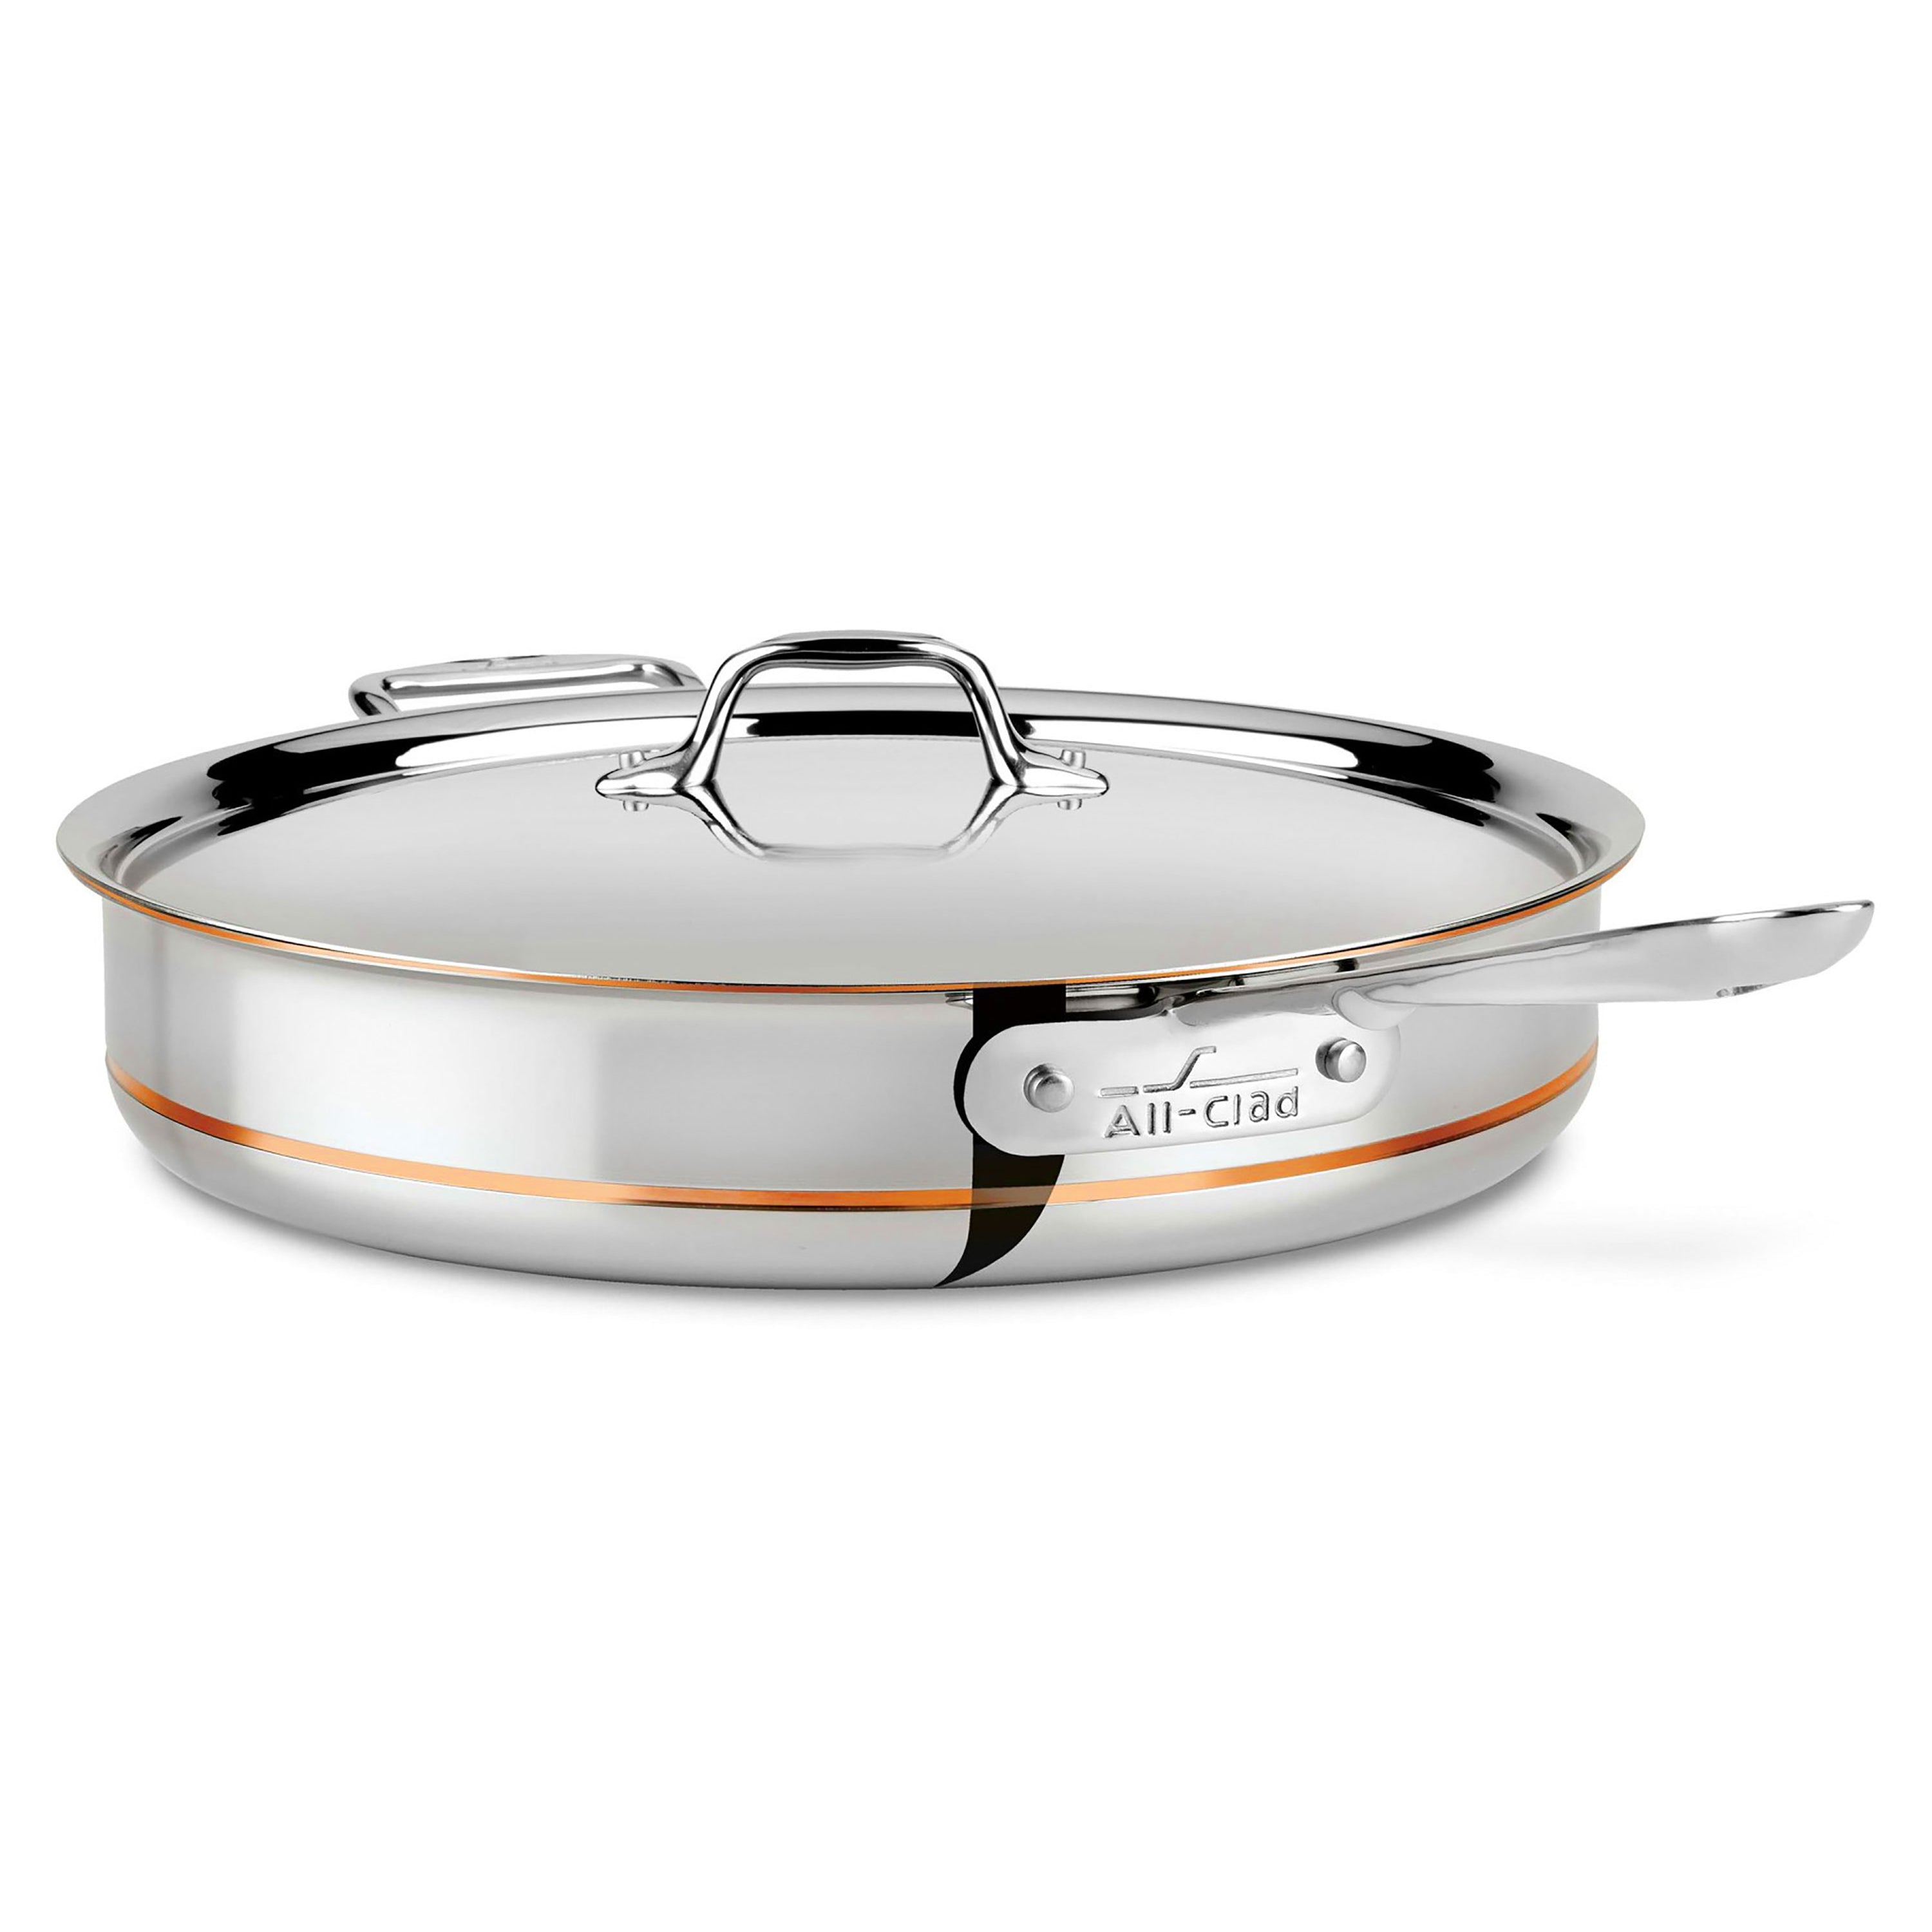 All-Clad Copper Core Saute Pan - 6-quart – Cutlery and More